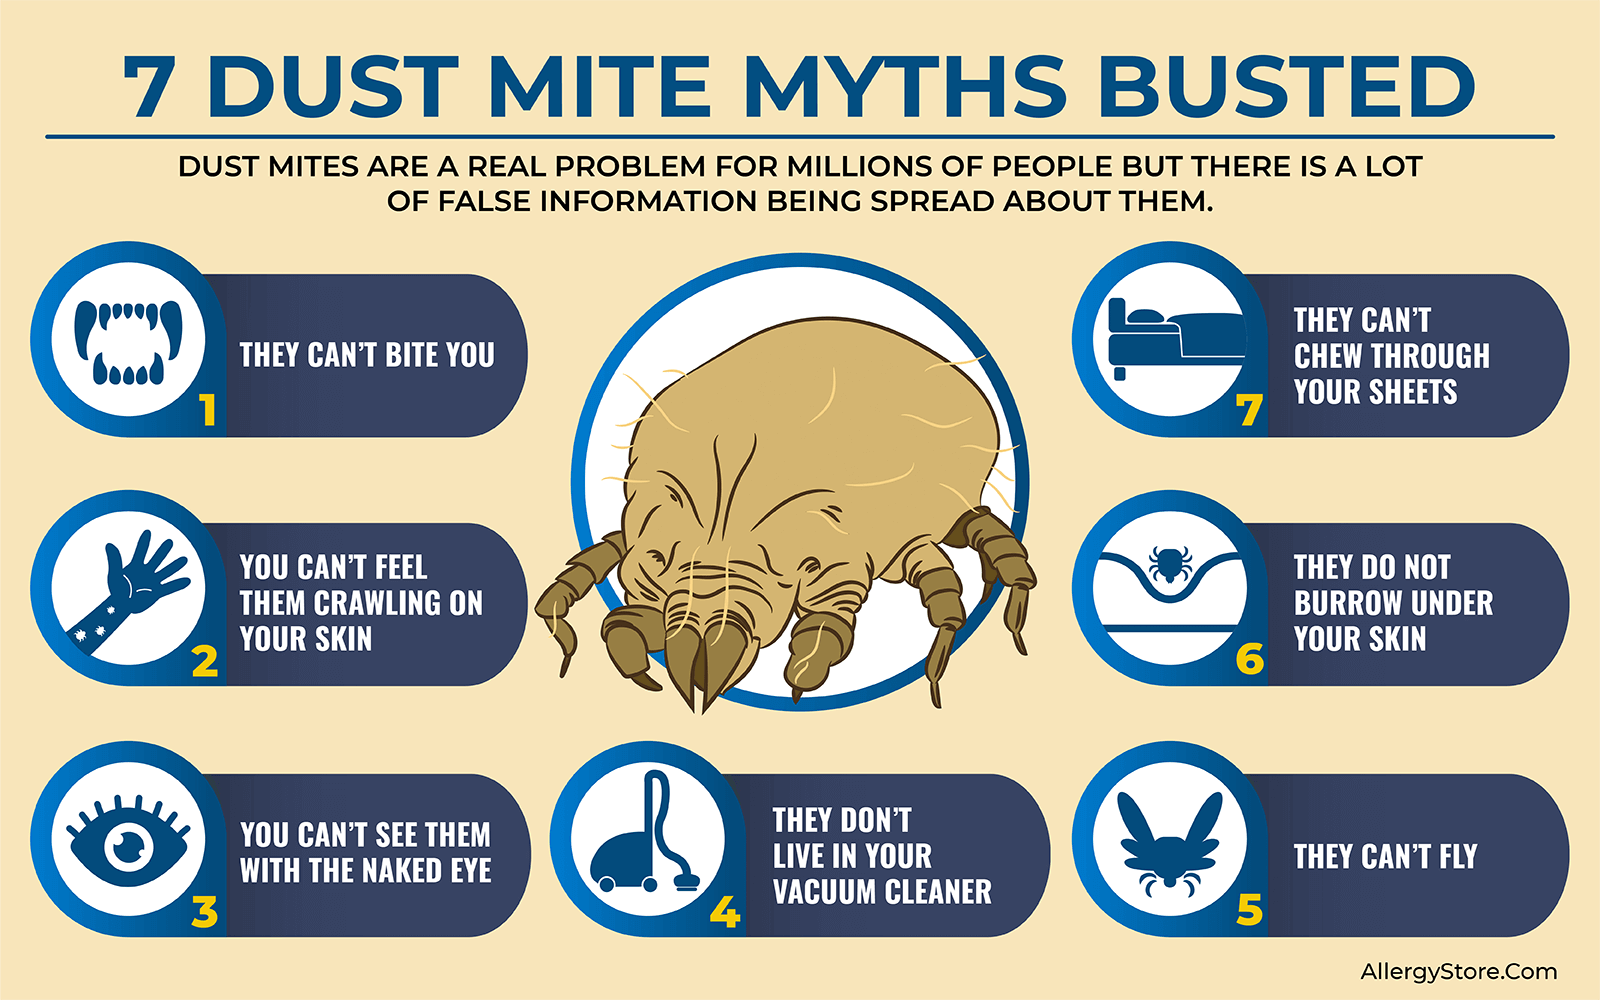 7 Dust Mite Myths Busted | We Need To Set The Record Straight.